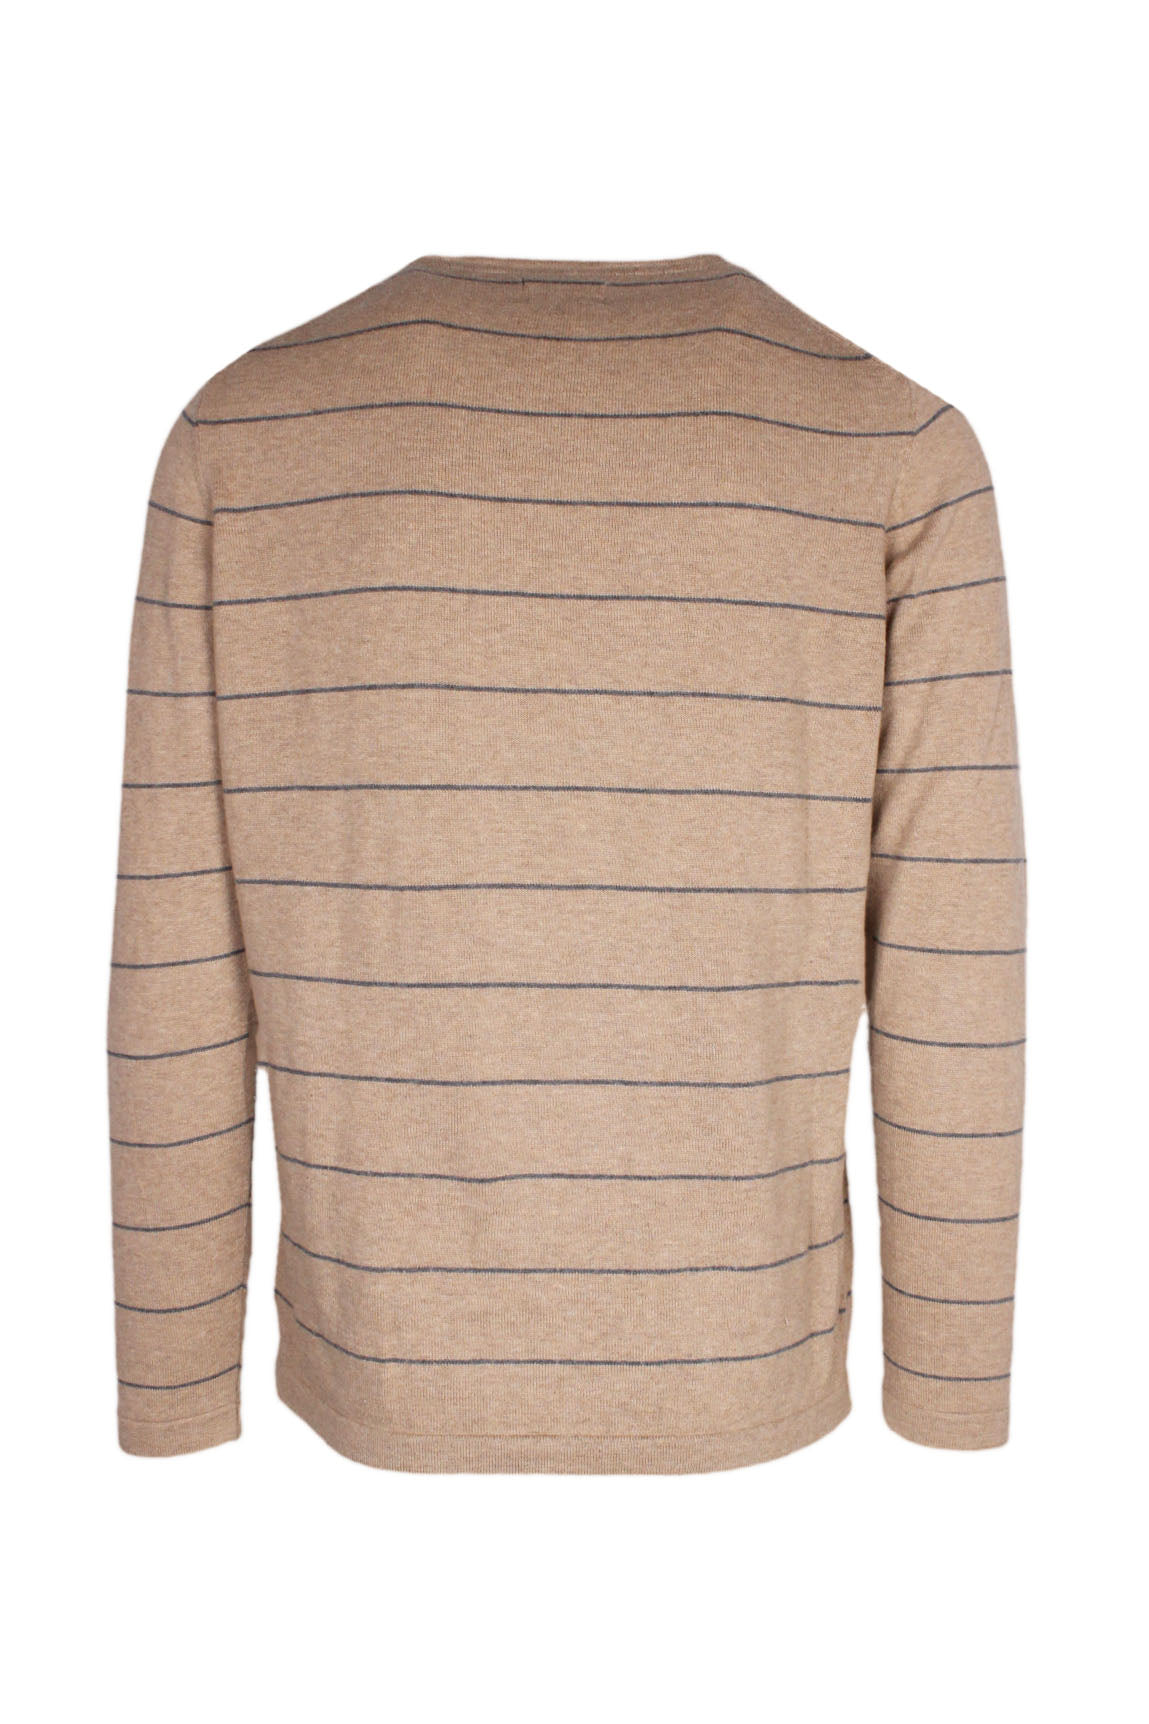 rear view with ribbed collar/cuffs/hem of sweater.